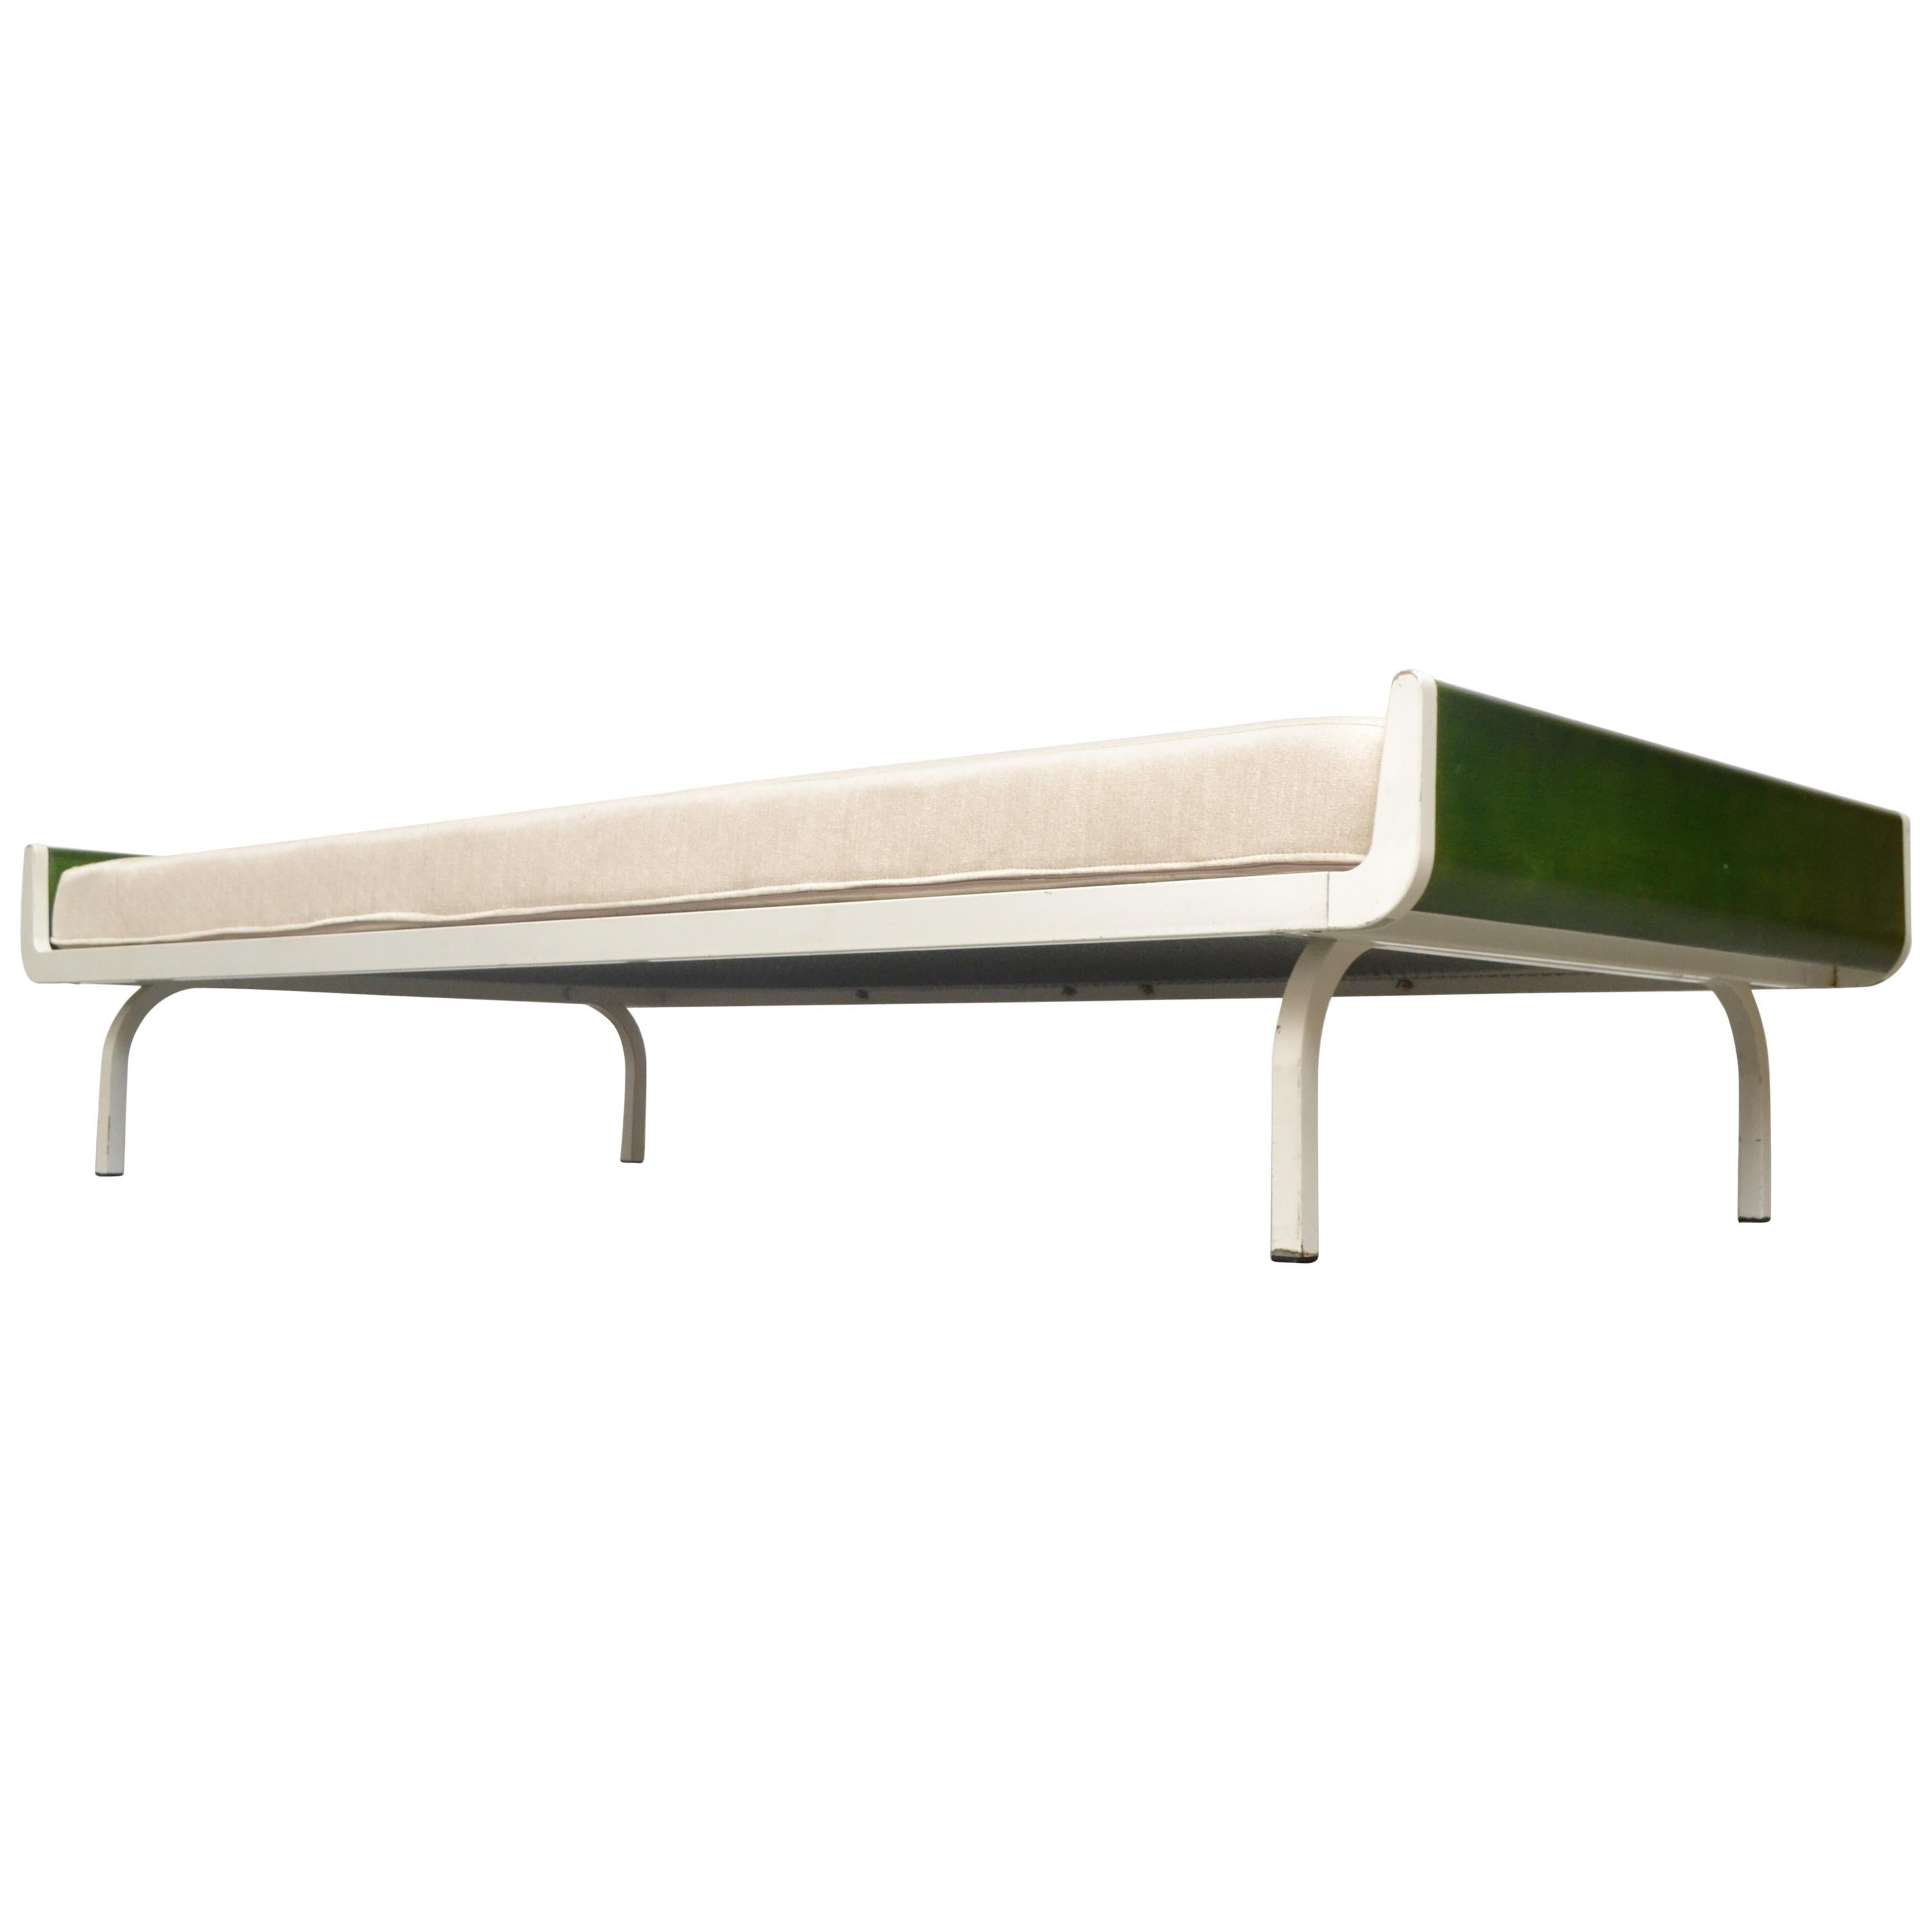 Midcentury Green Teak and Metal Auping Daybed